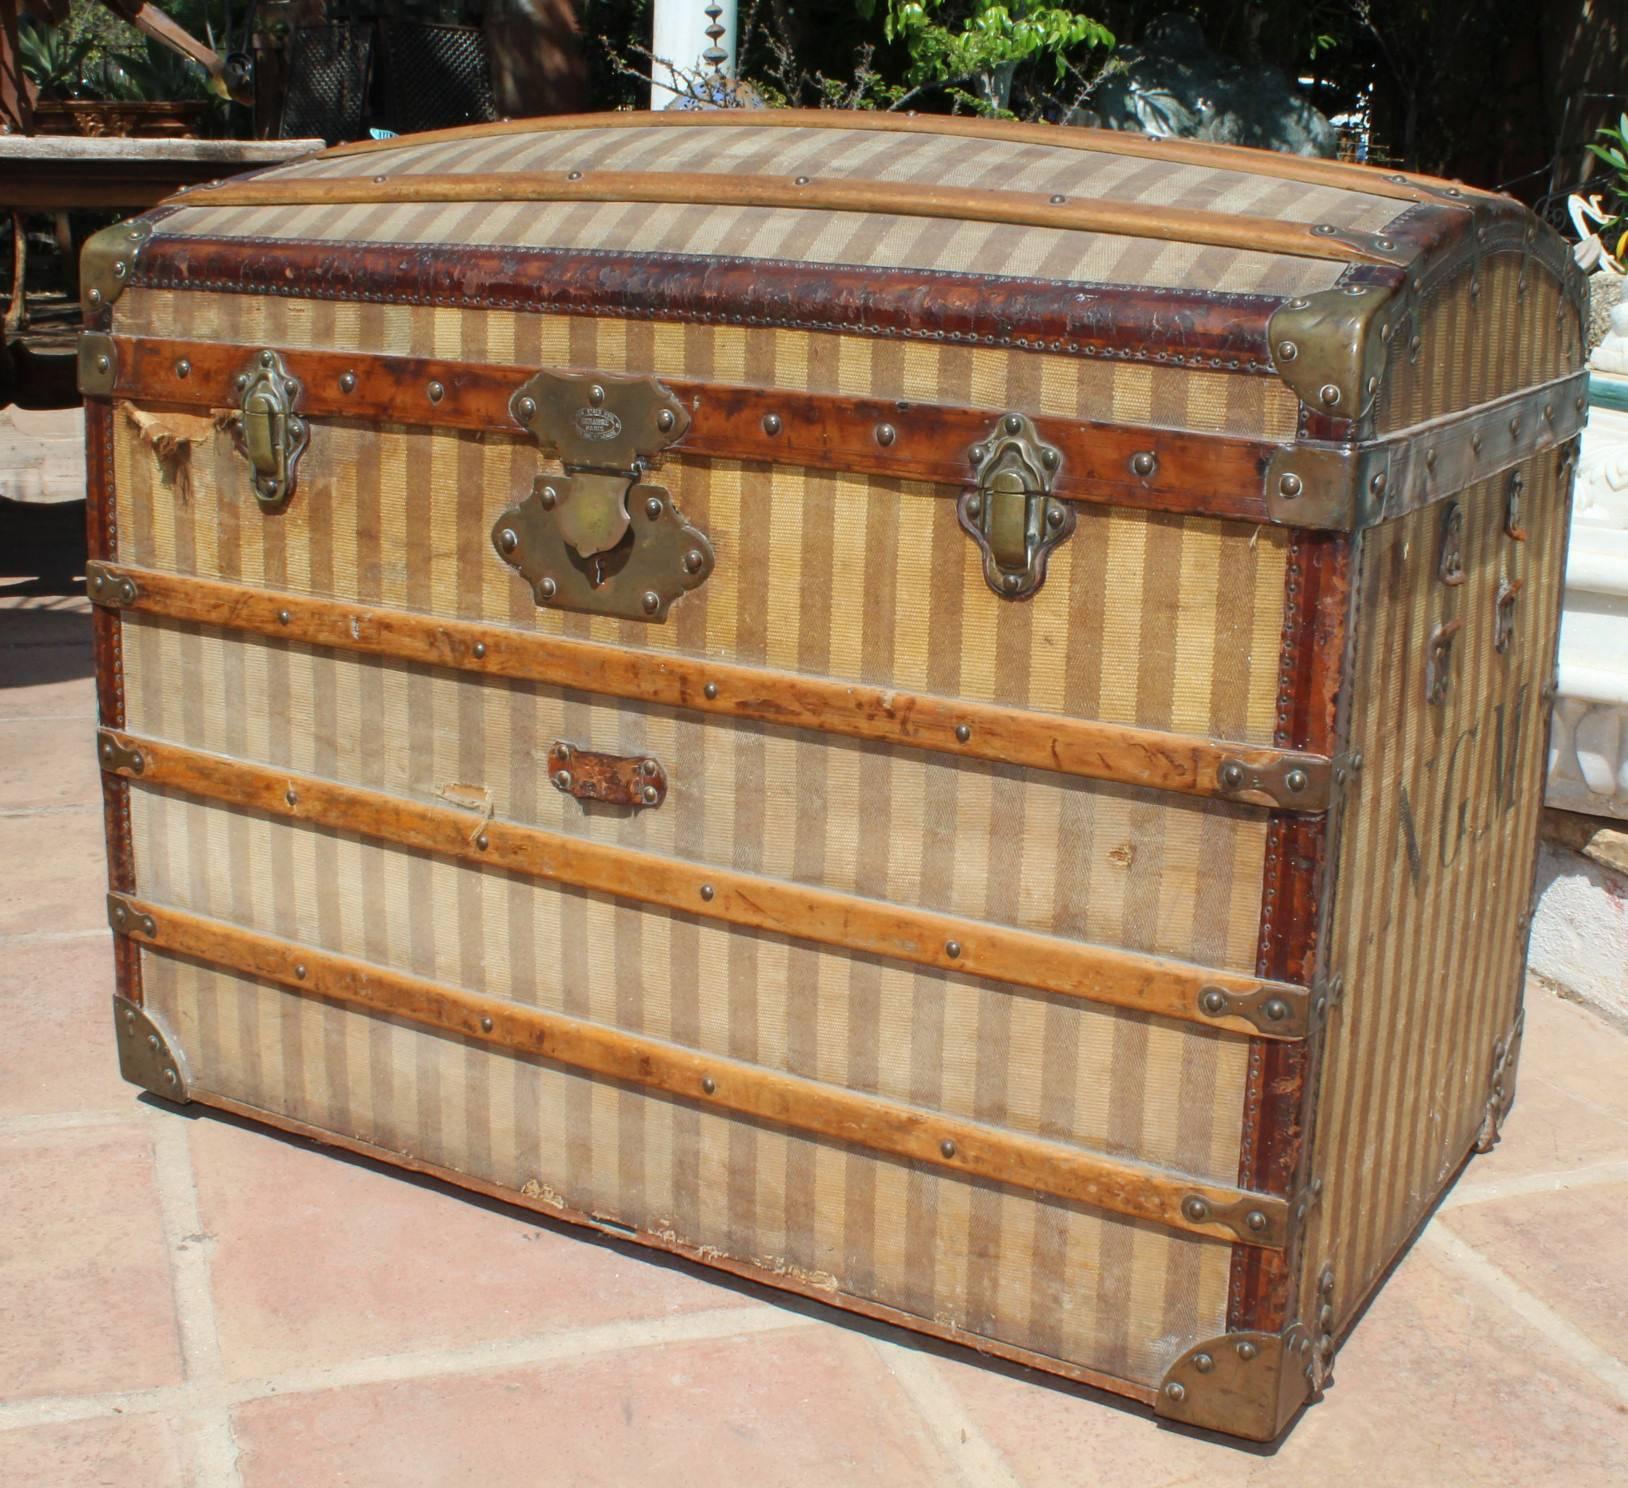 Mid-20th century, French wooden travel trunk with original striped upholstery and the owners initials engraved on the side. The front part has a plaque with the makers, Deraisme Paris and their full address. 


